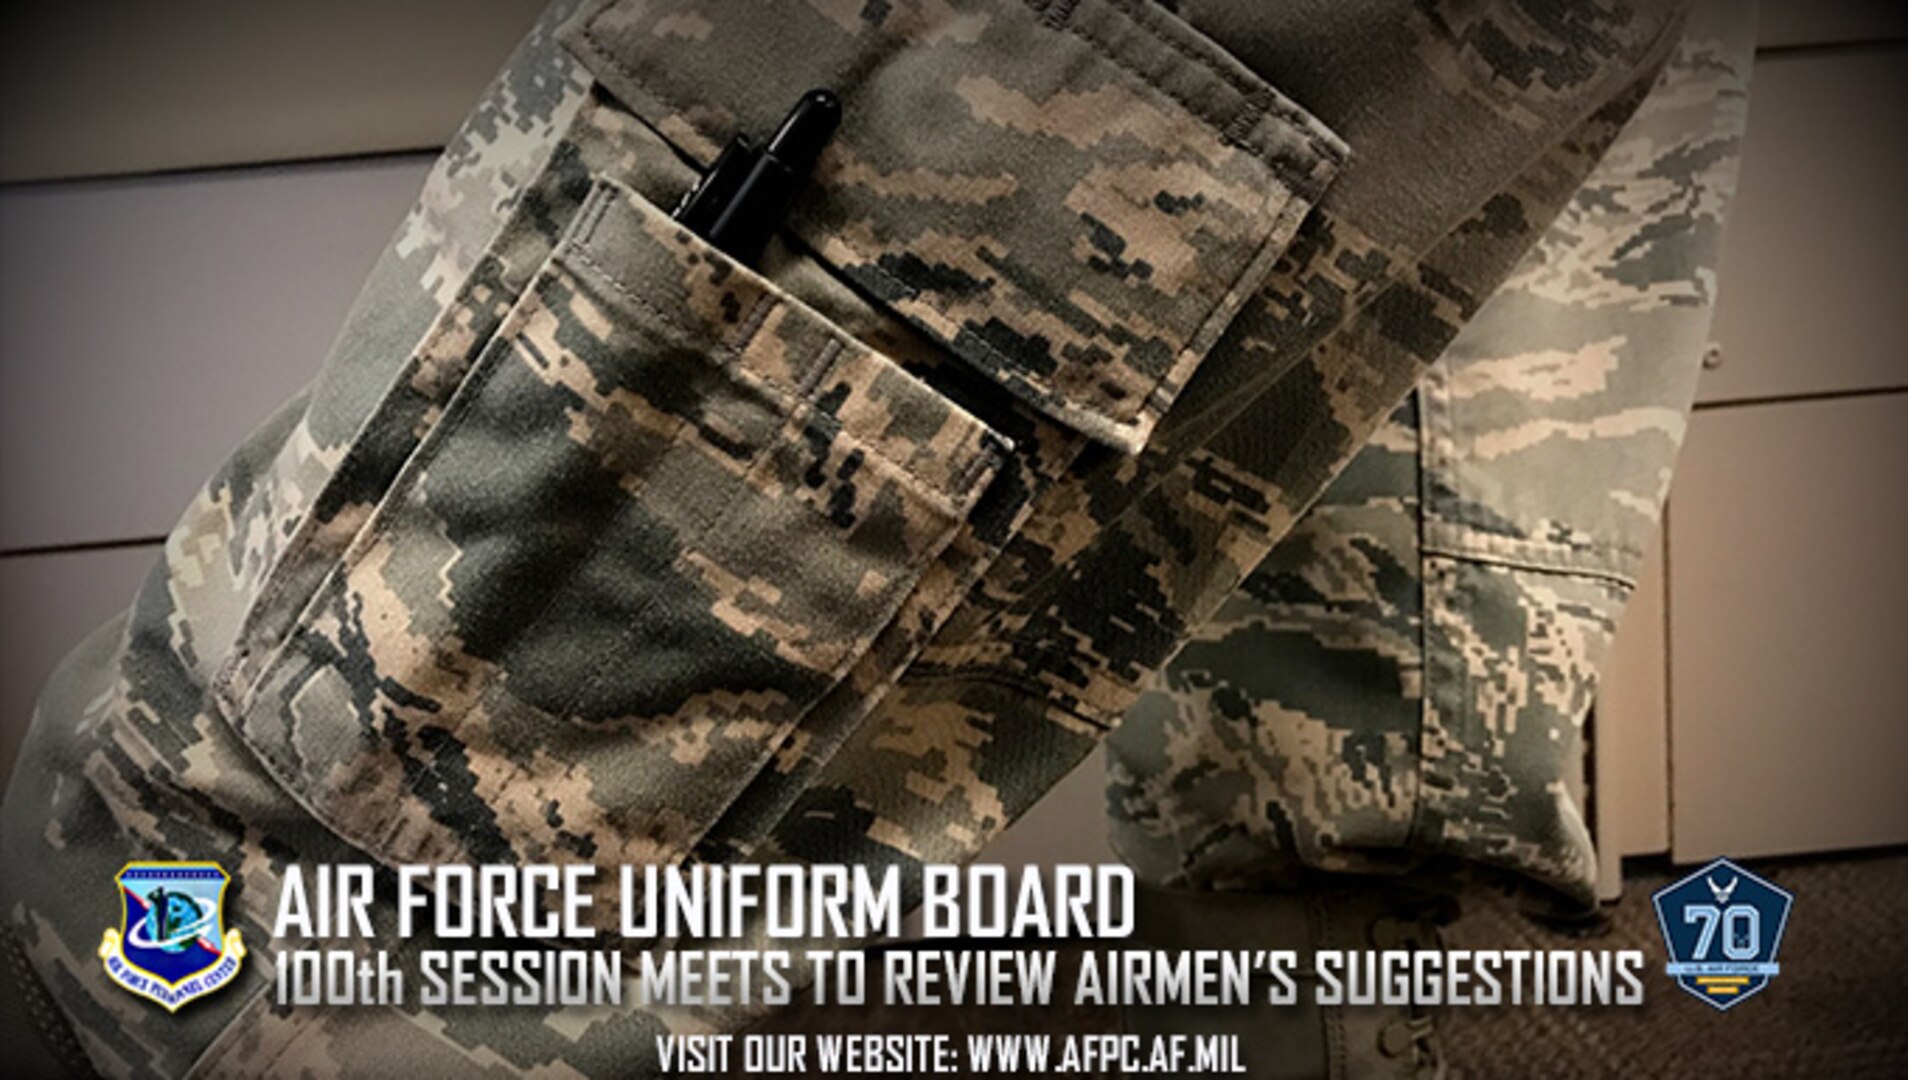 The 100th session of the Air Force Uniform Board was in session through April 28 to review ideas and recommendations submitted by Airmen in order to improve or change Air Force uniforms, wear policy and grooming standards. The board does not come up with its own ideas, but vets ideas submitted by Airmen. 